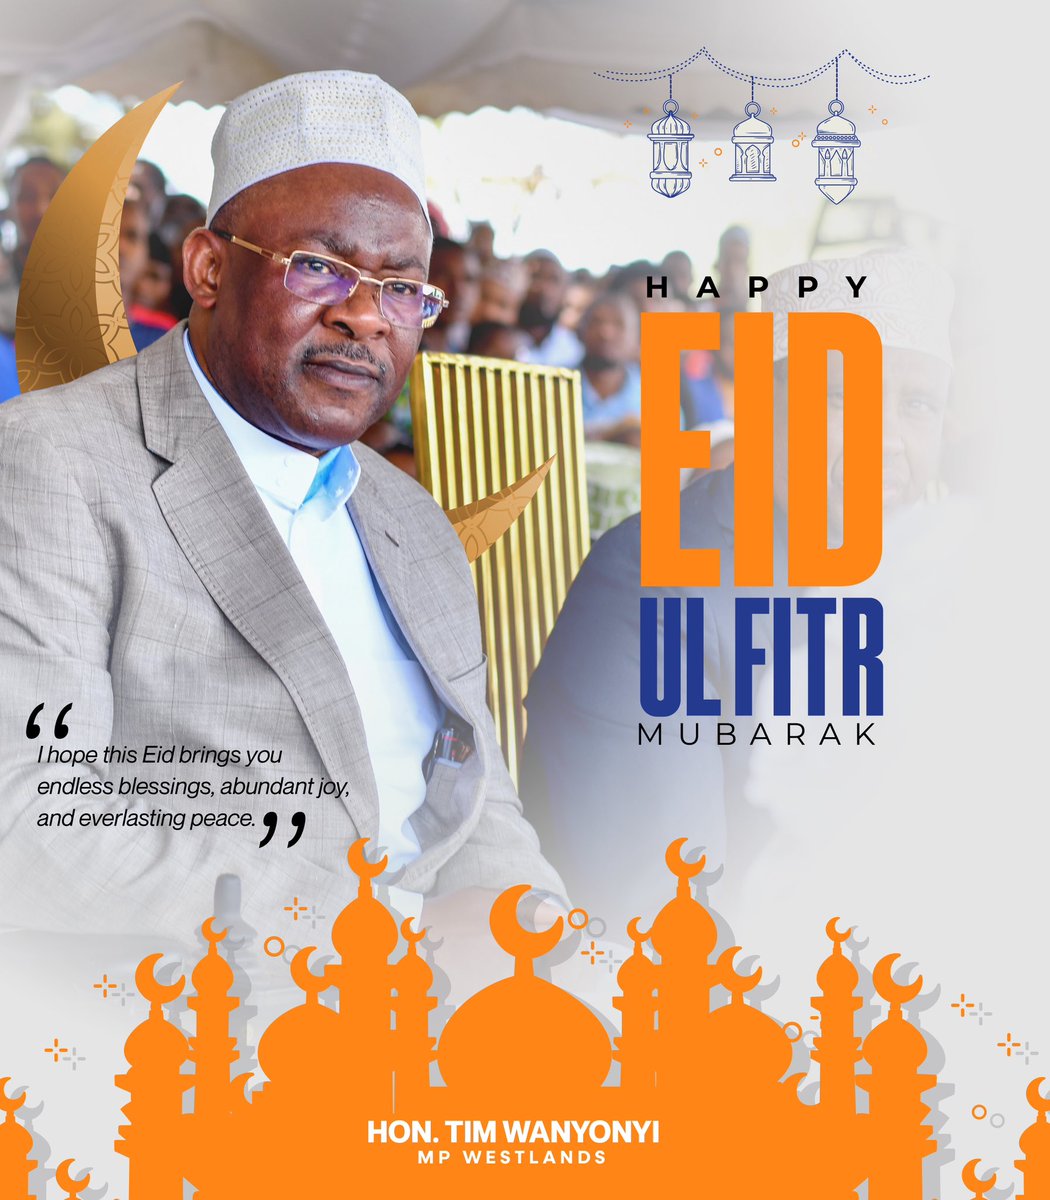 As Ramadan draws to a close, I extend heartfelt Eid greetings to all Muslims in Nairobi and beyond. May this joyous occasion bring you peace, prosperity, and countless blessings. Eid Mubarak!